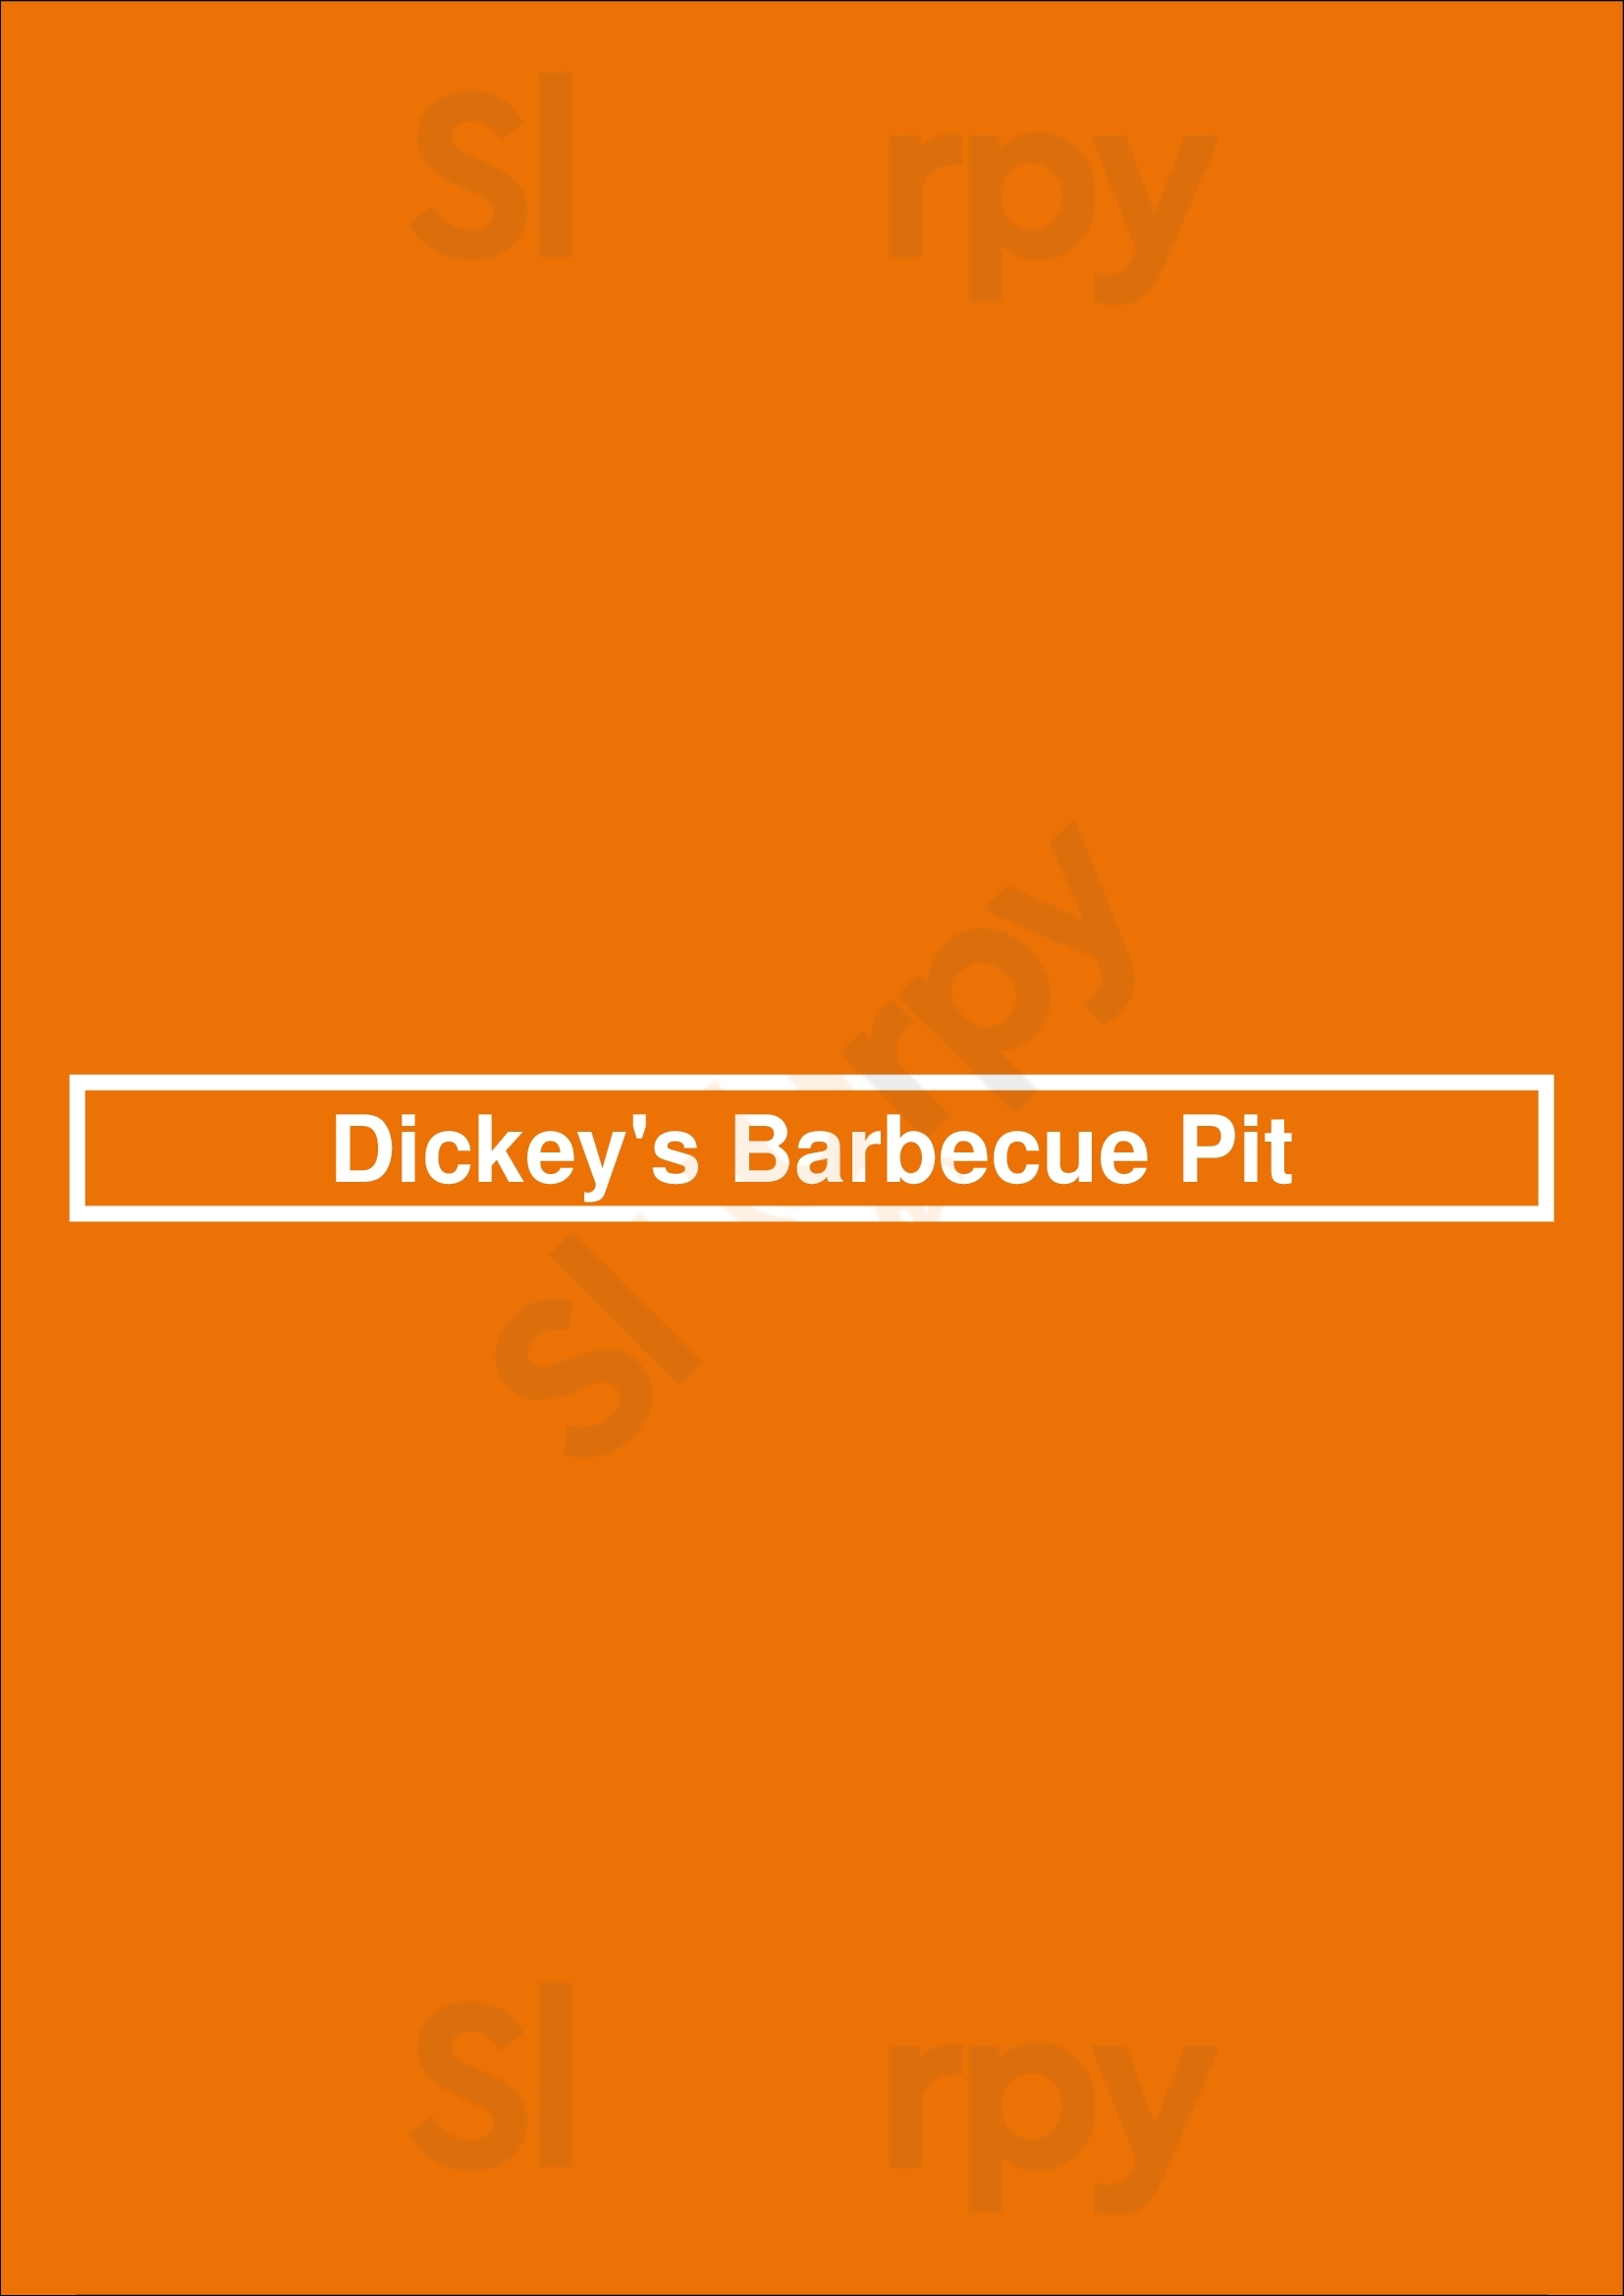 Dickey's Barbecue Pit Bakersfield Menu - 1